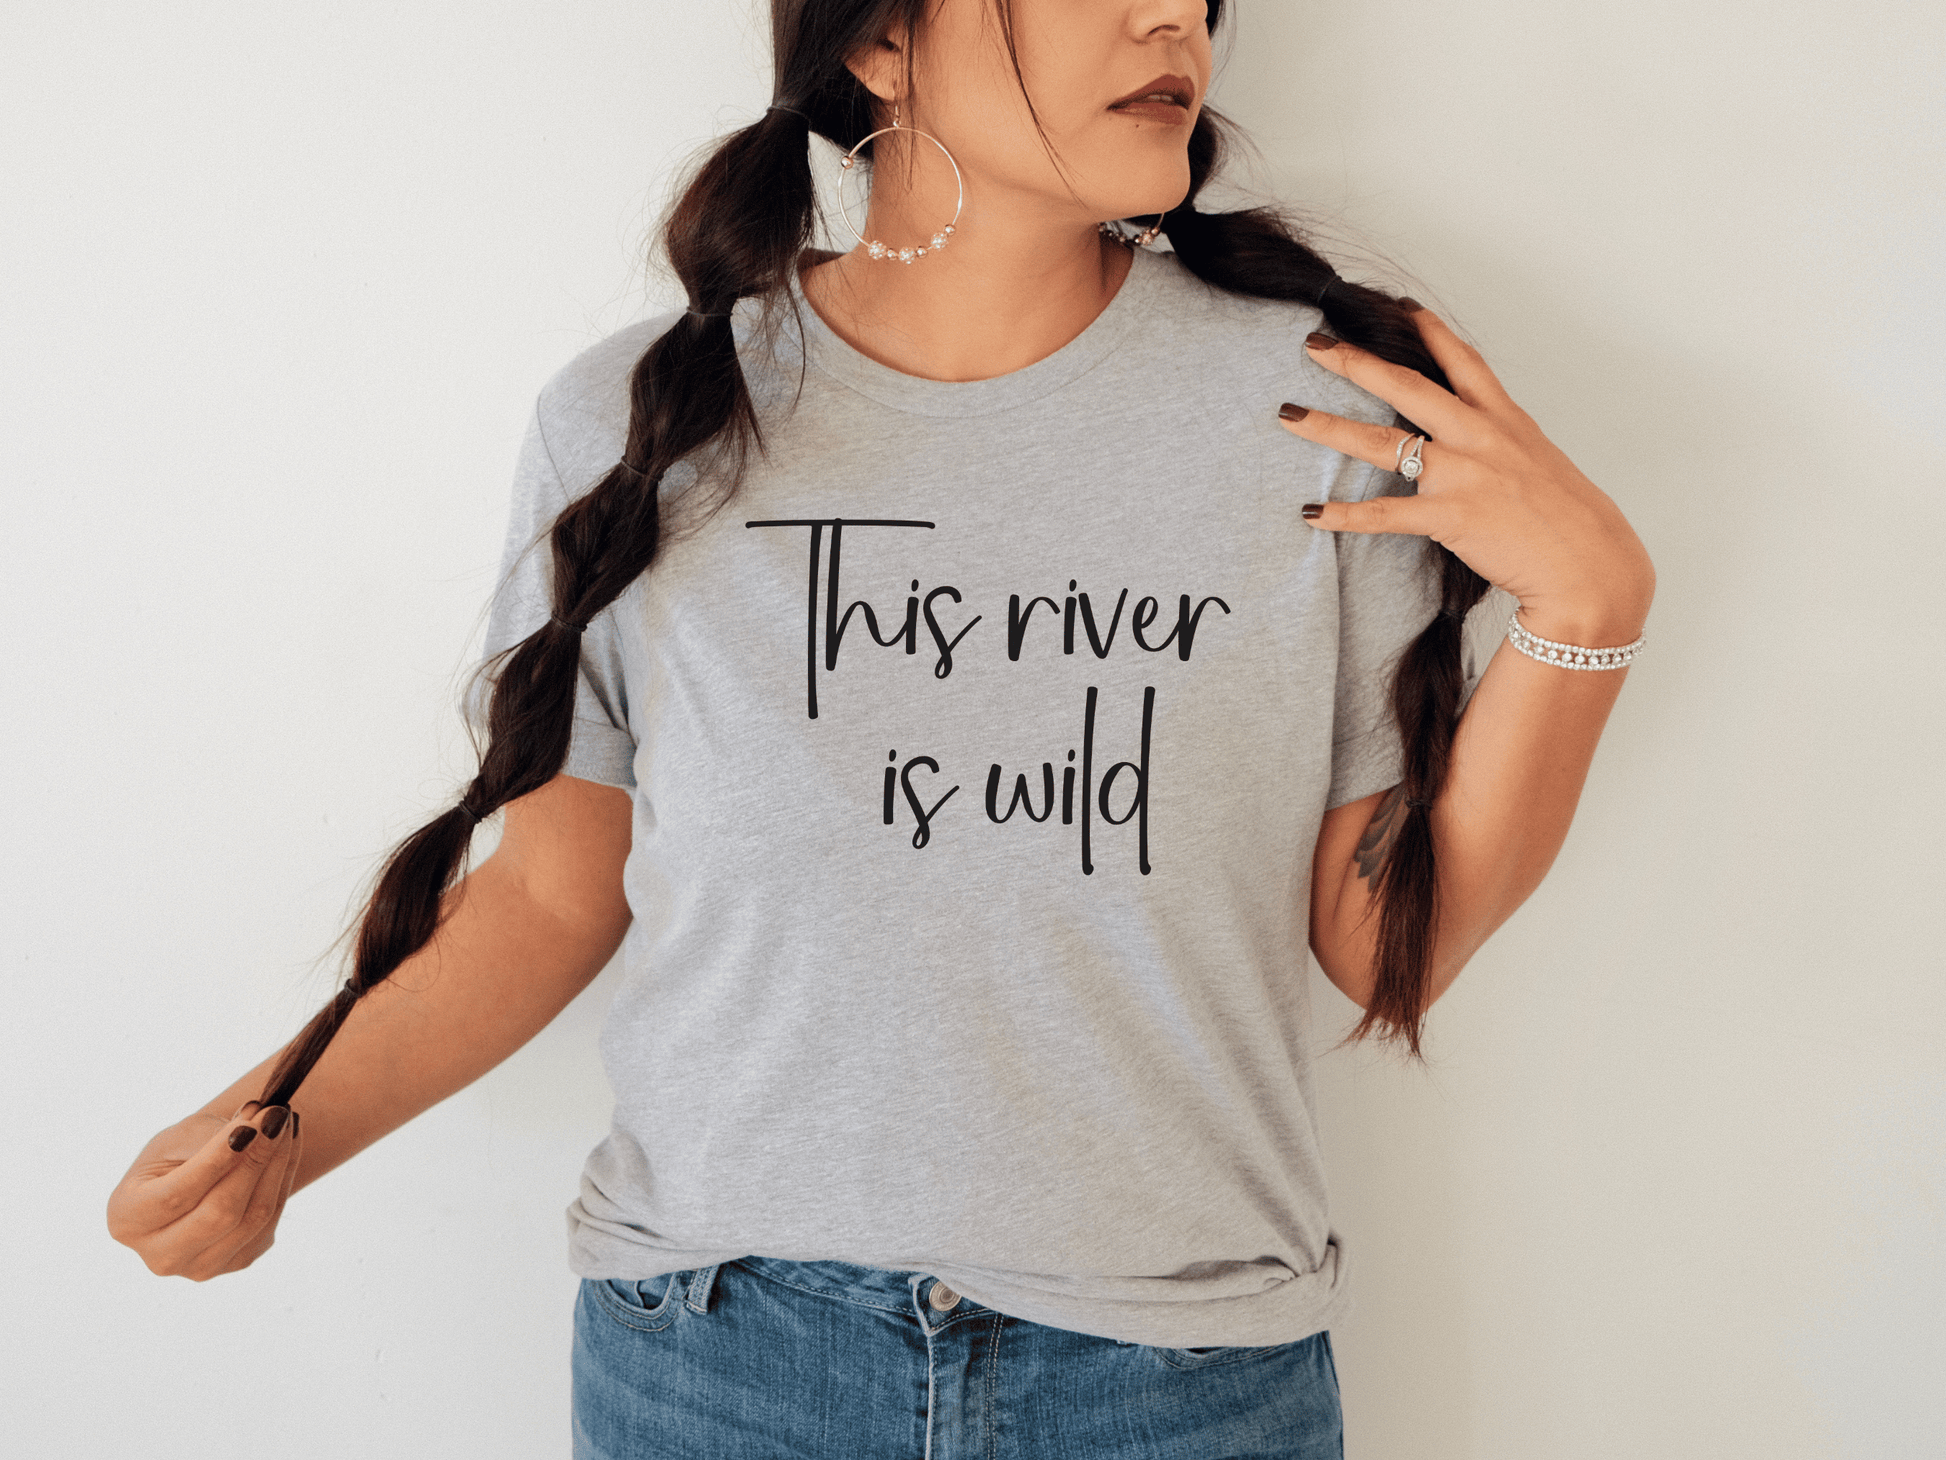 The KIllers "This River is Wild" T-Shirt in Athletic Heather